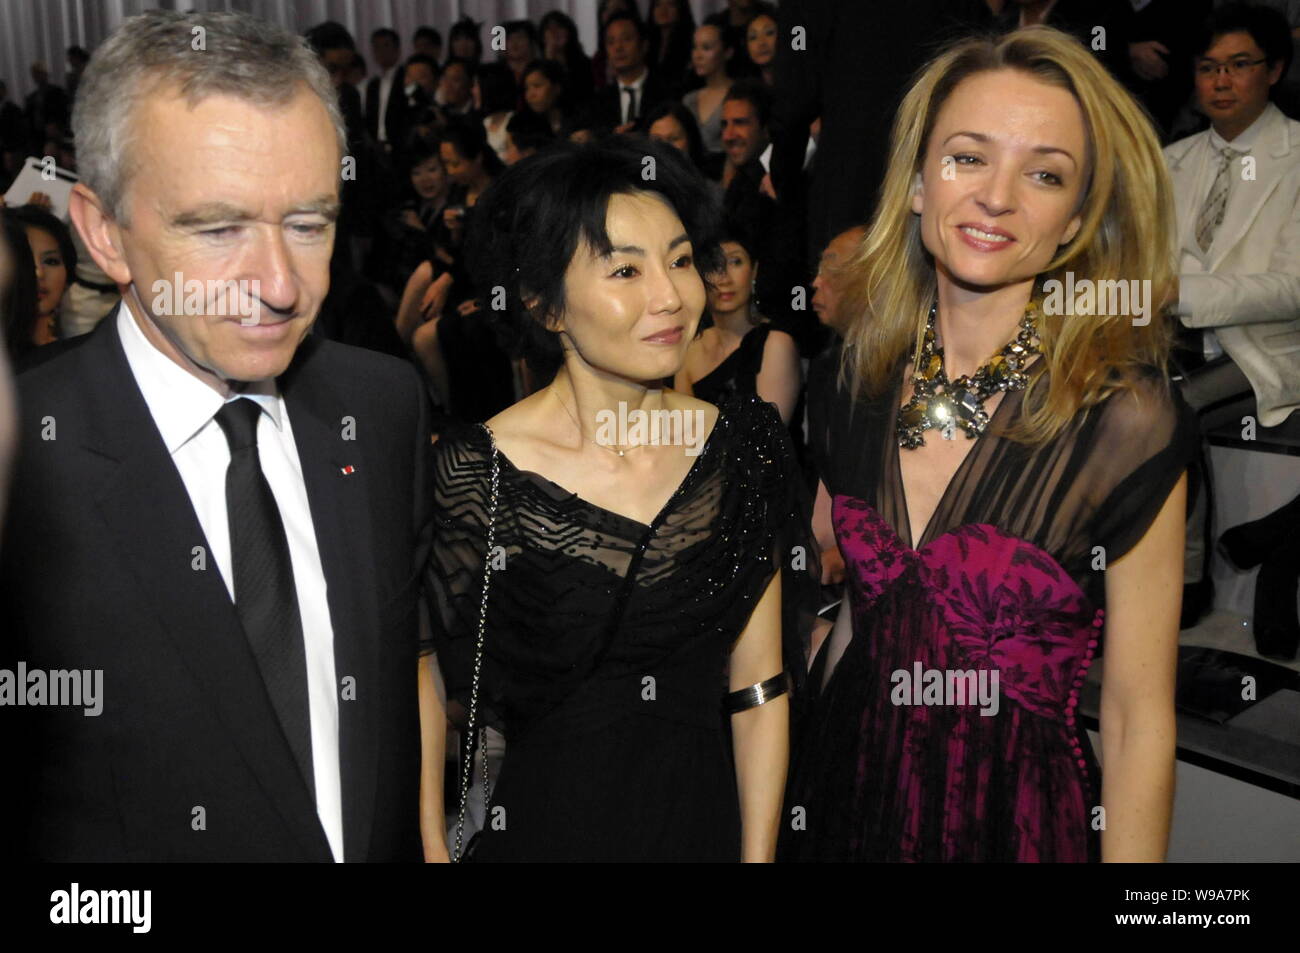 Bernard Arnault Ceo Moet Hennessy Louis Vuitton Mhlv Shakes Hands – Stock  Editorial Photo © ChinaImages #245103848